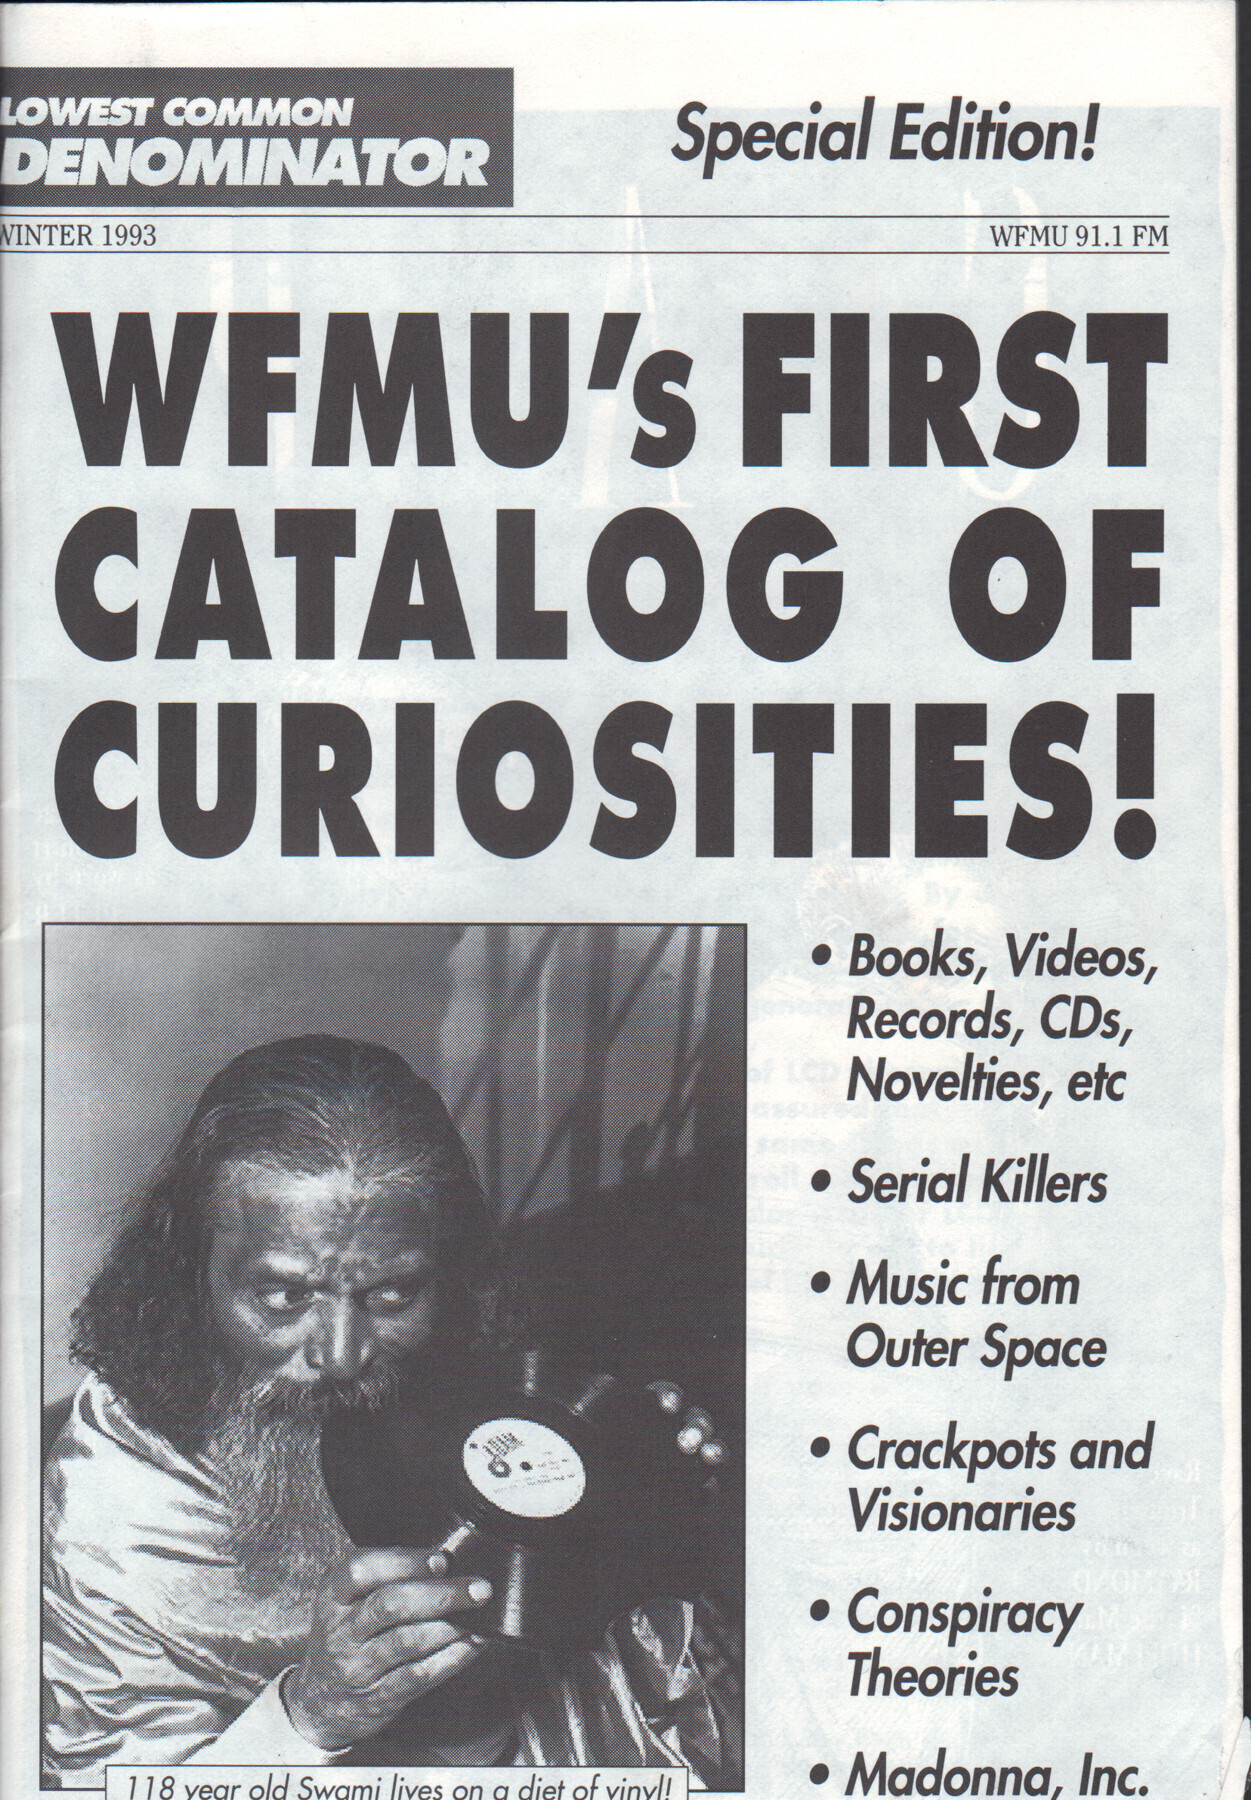 KURT COBAIN OWNED WFMU PROGRAM GUIDE USED DURING MTV UNPLUGGED REHEARSALS